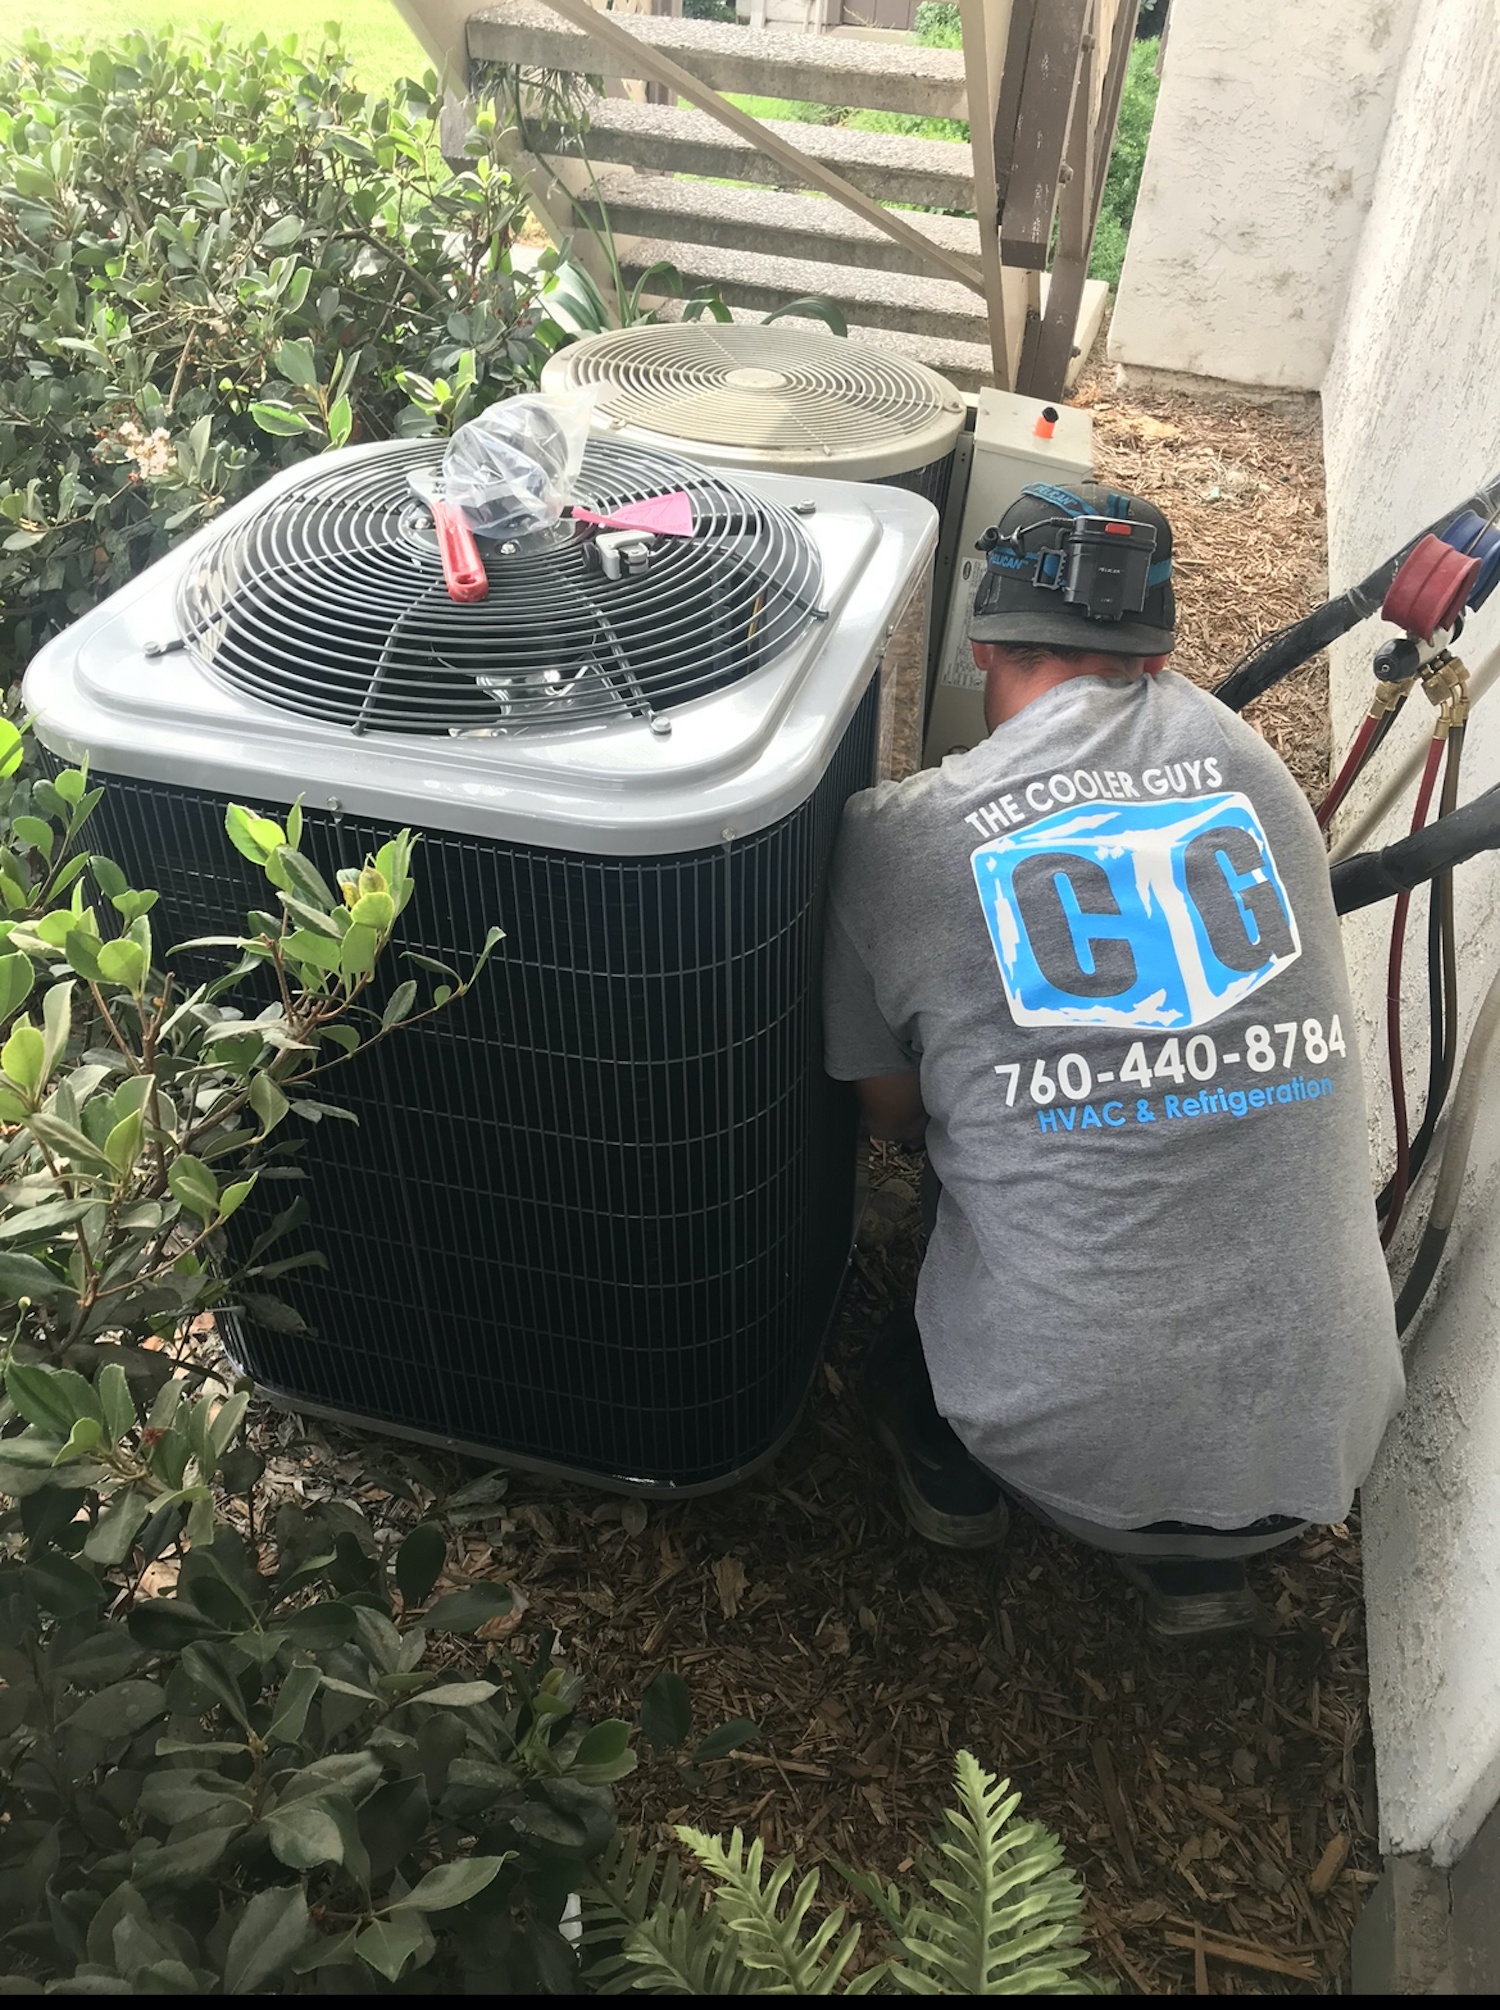 The Cooler Guys HVAC tech working on air conditioning unit